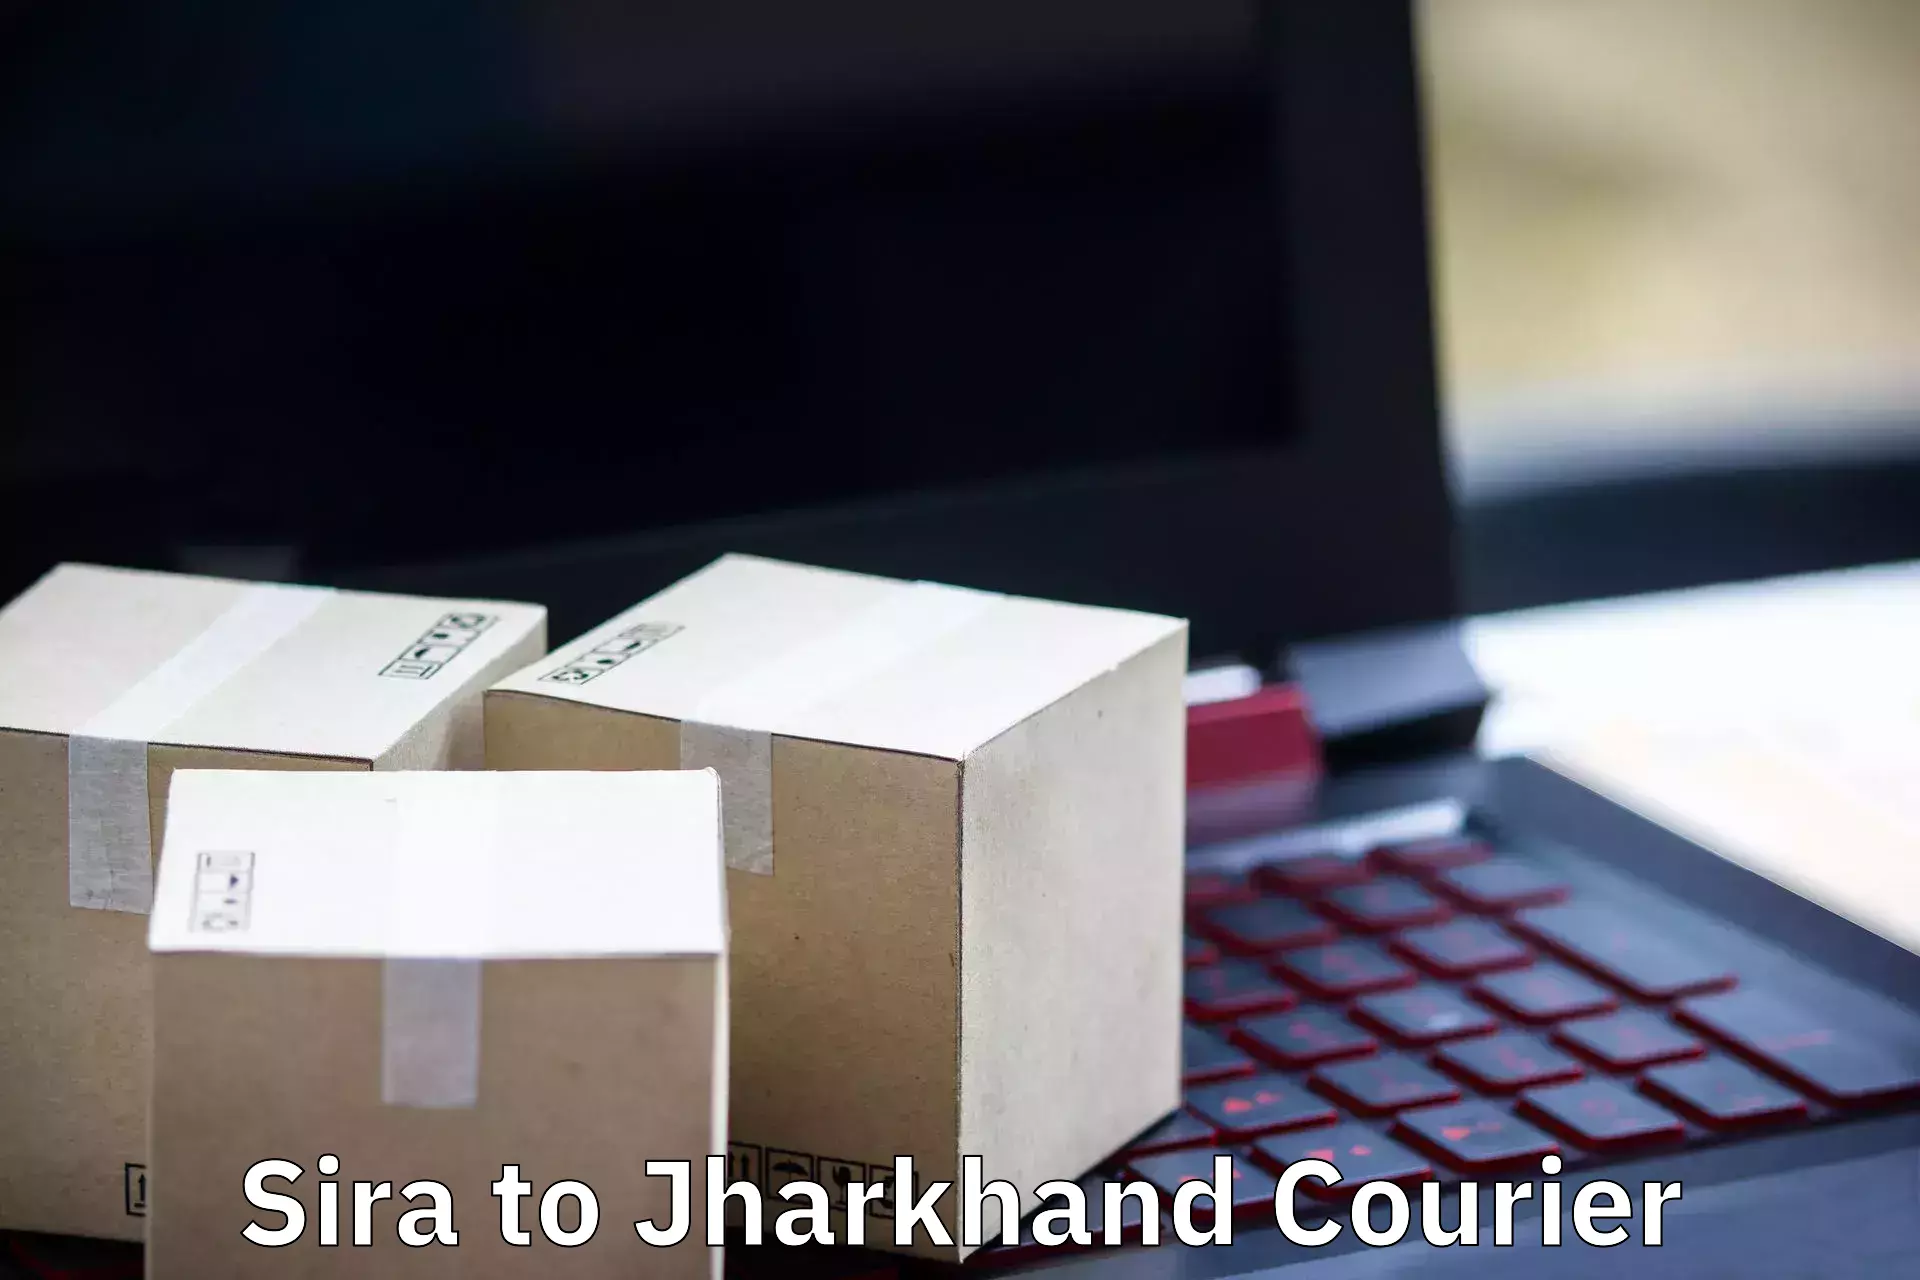 Doorstep moving services in Sira to Jamshedpur